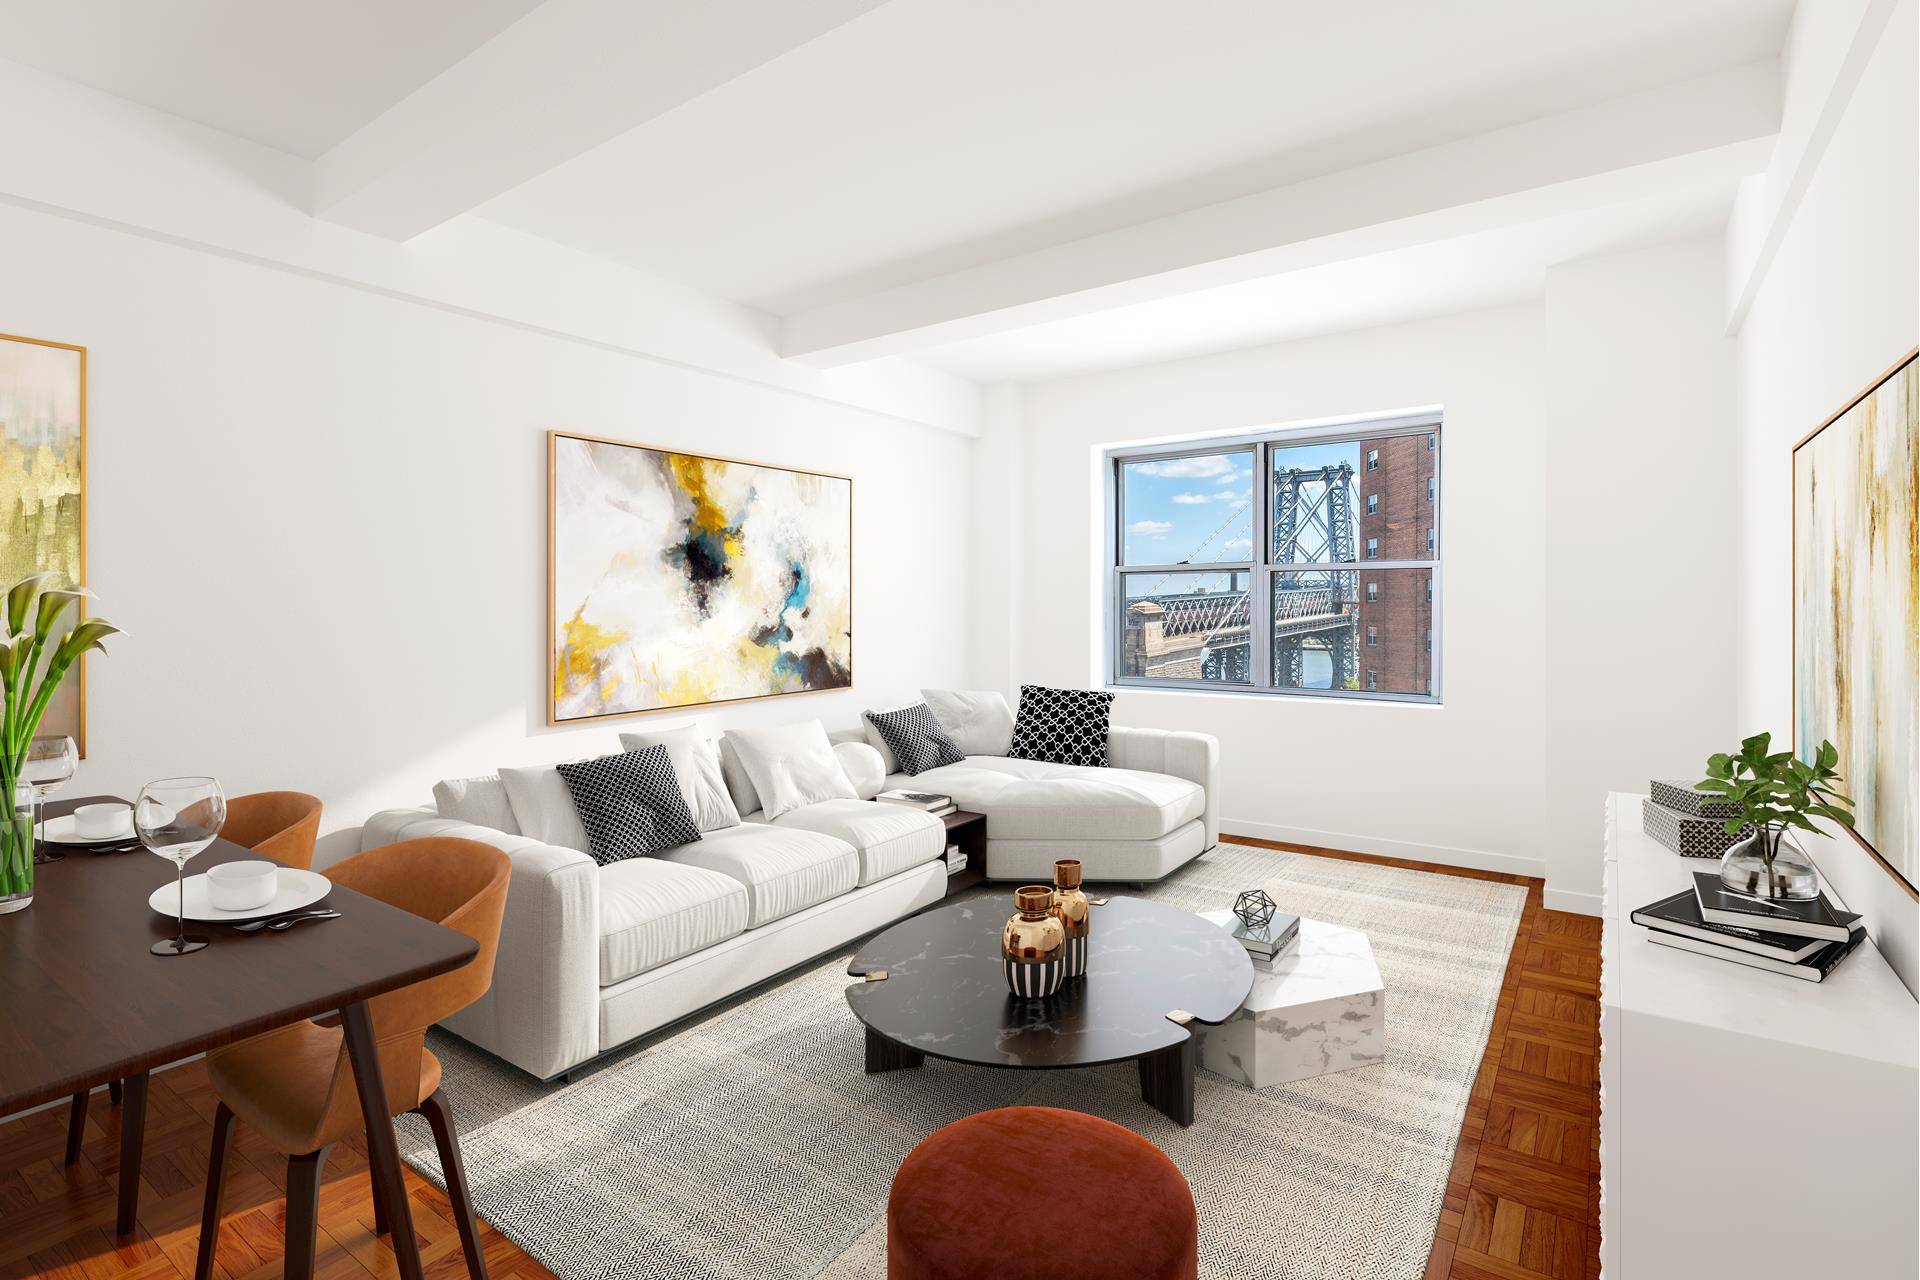 This is a one of a kind sunny and massive home situated on the top floor of this historic Lower East side Hillman tower with its sweeping views of the ...